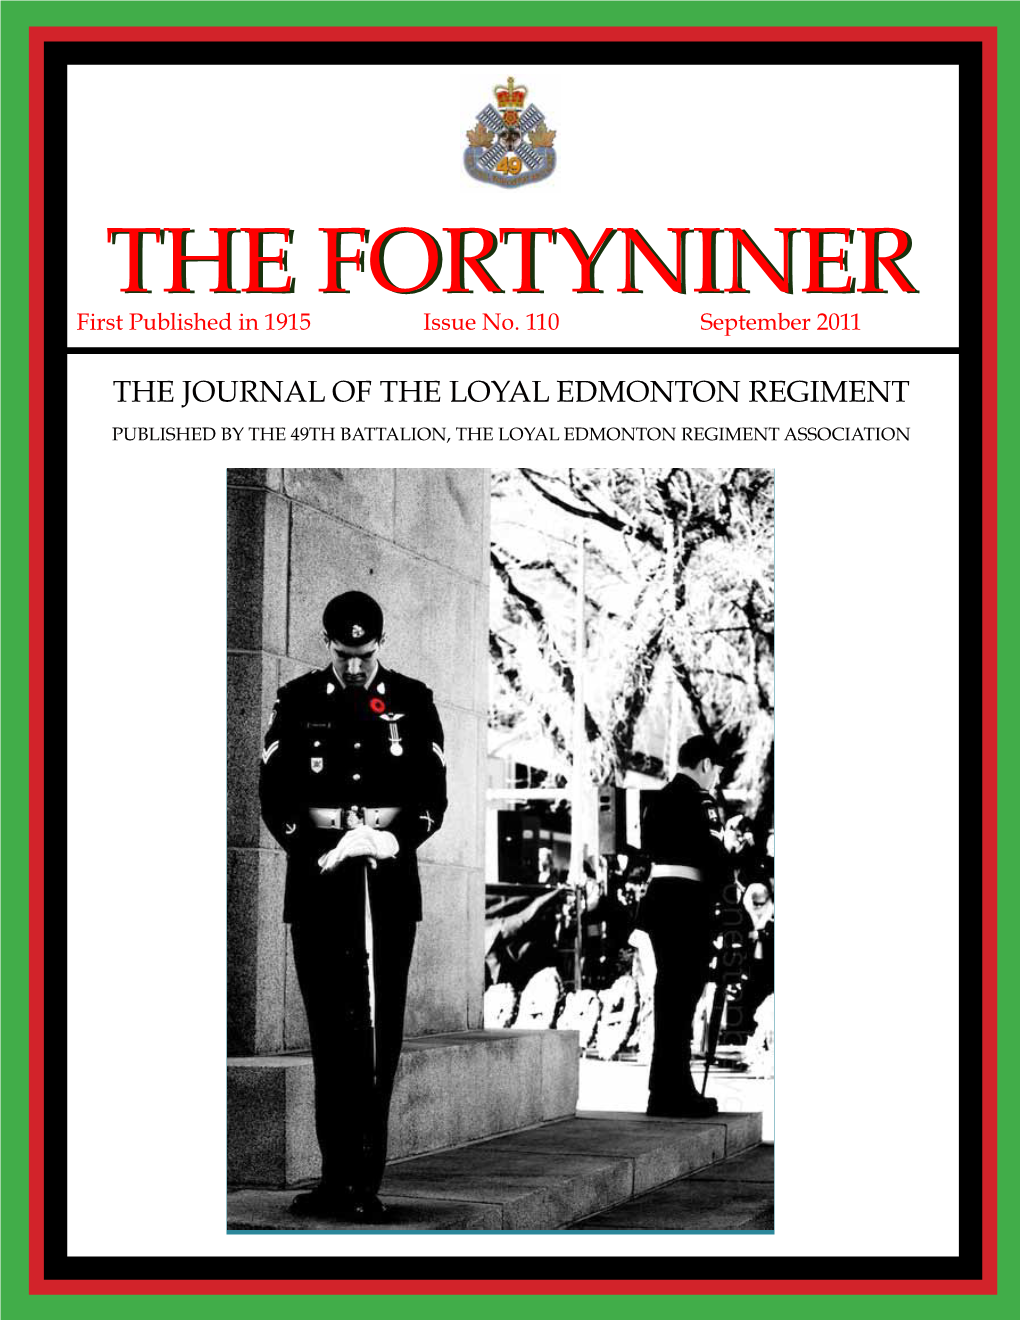 THE FORTYNINERFORTYNINER First Published in 1915 Issue No